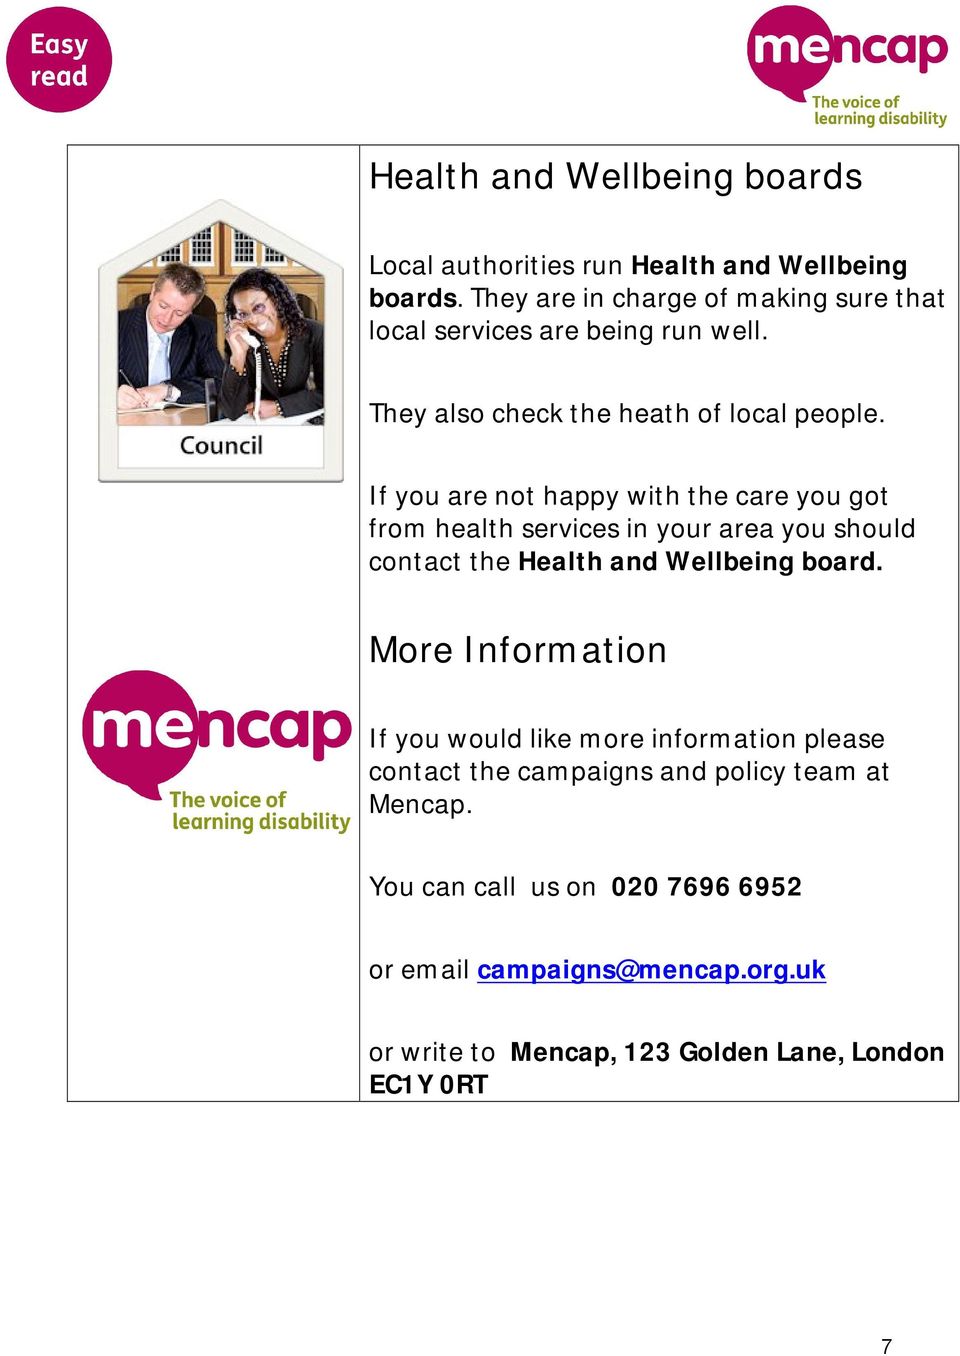 from health services in your area you should contact the Health and Wellbeing board.